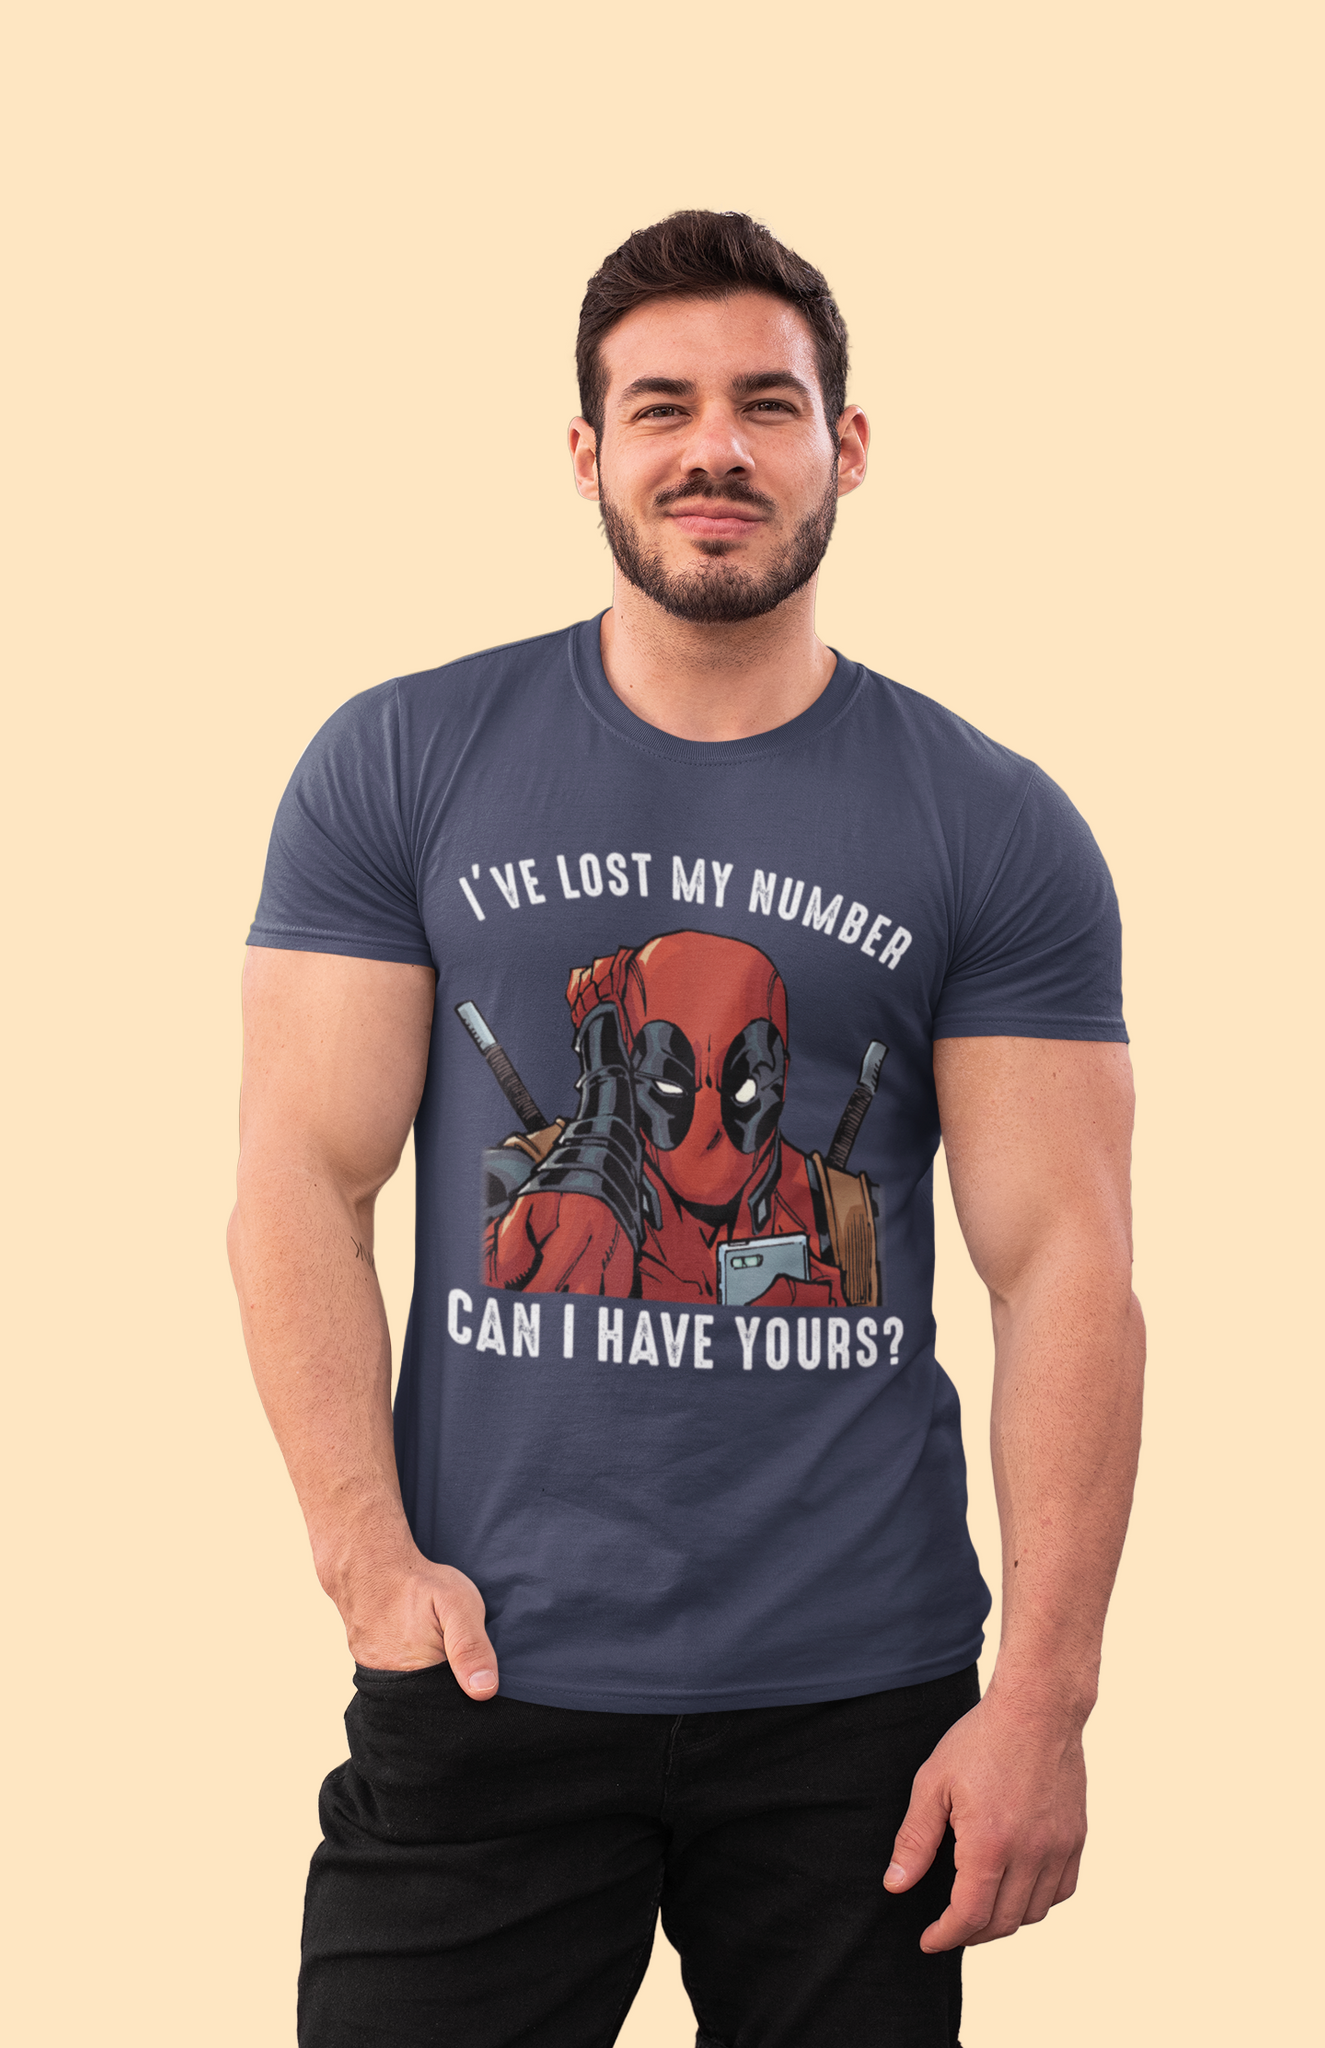 Deadpool T Shirt, Ive Lost My Number Can I Have Yours Tshirt, Superhero Deadpool T Shirt